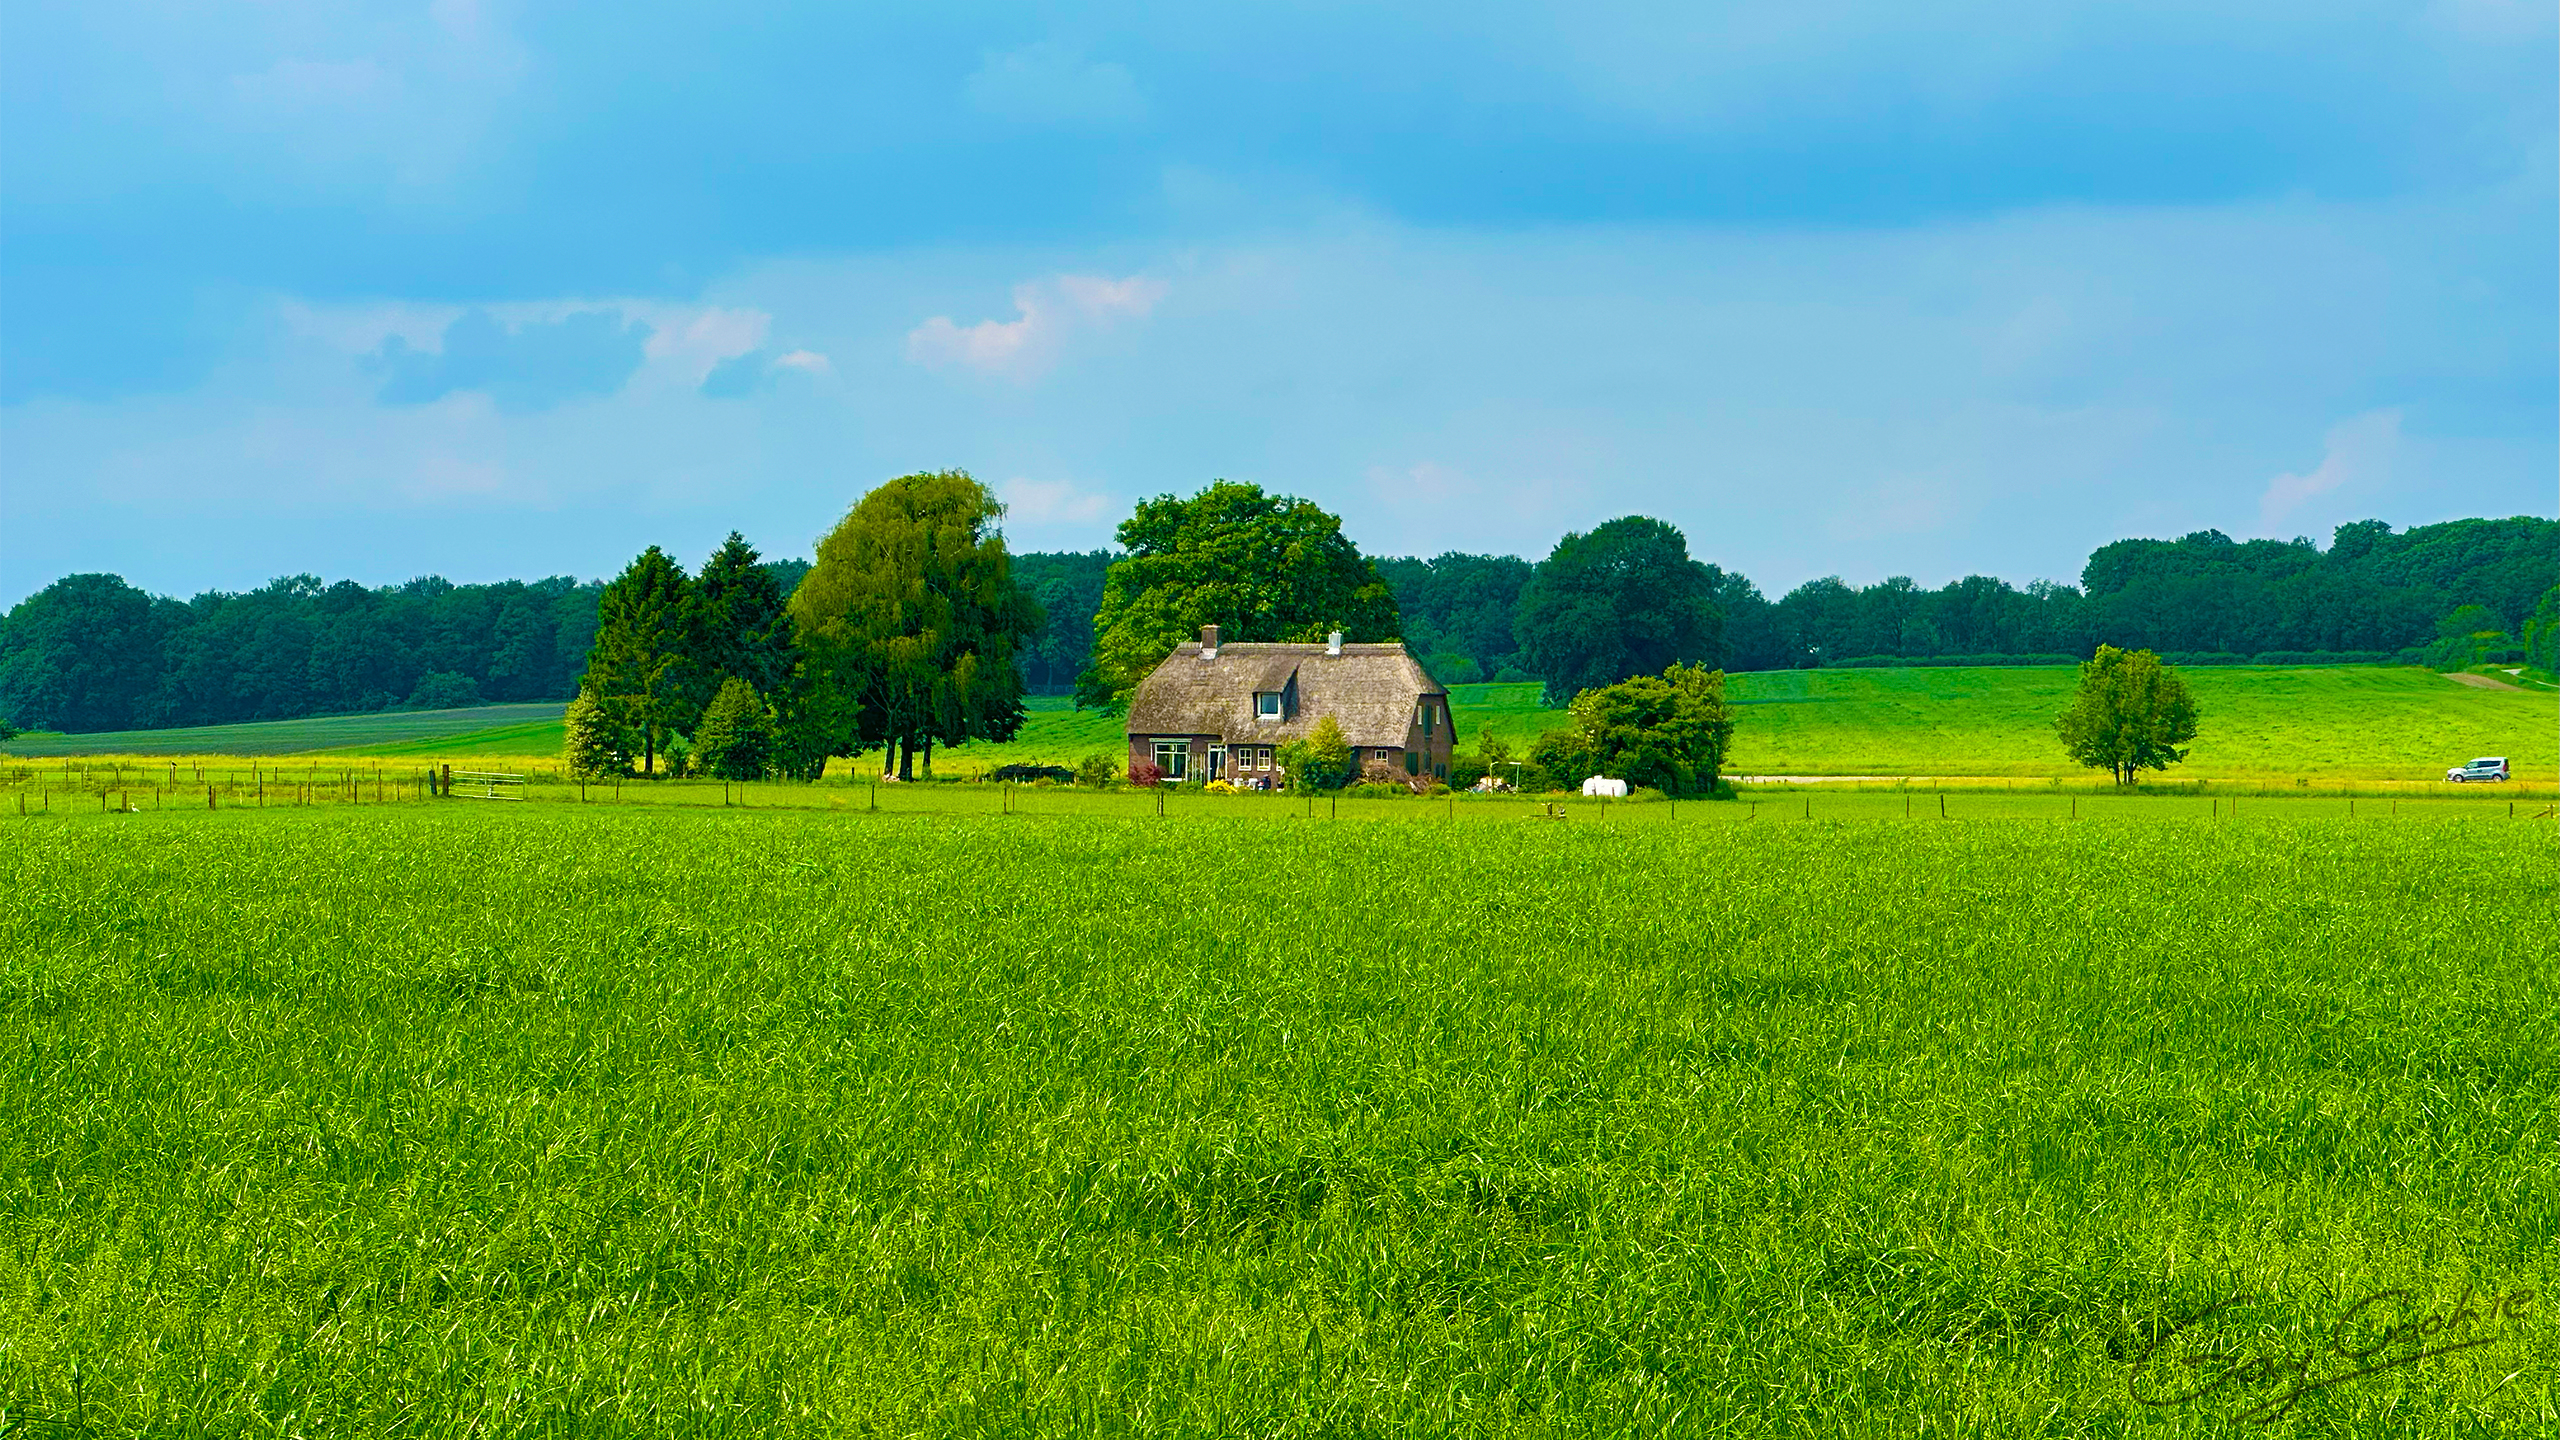 General 2560x1440 countryside scene rural nature greenery grass landscape cottage country field trees sky blue peaceful Farmhouse